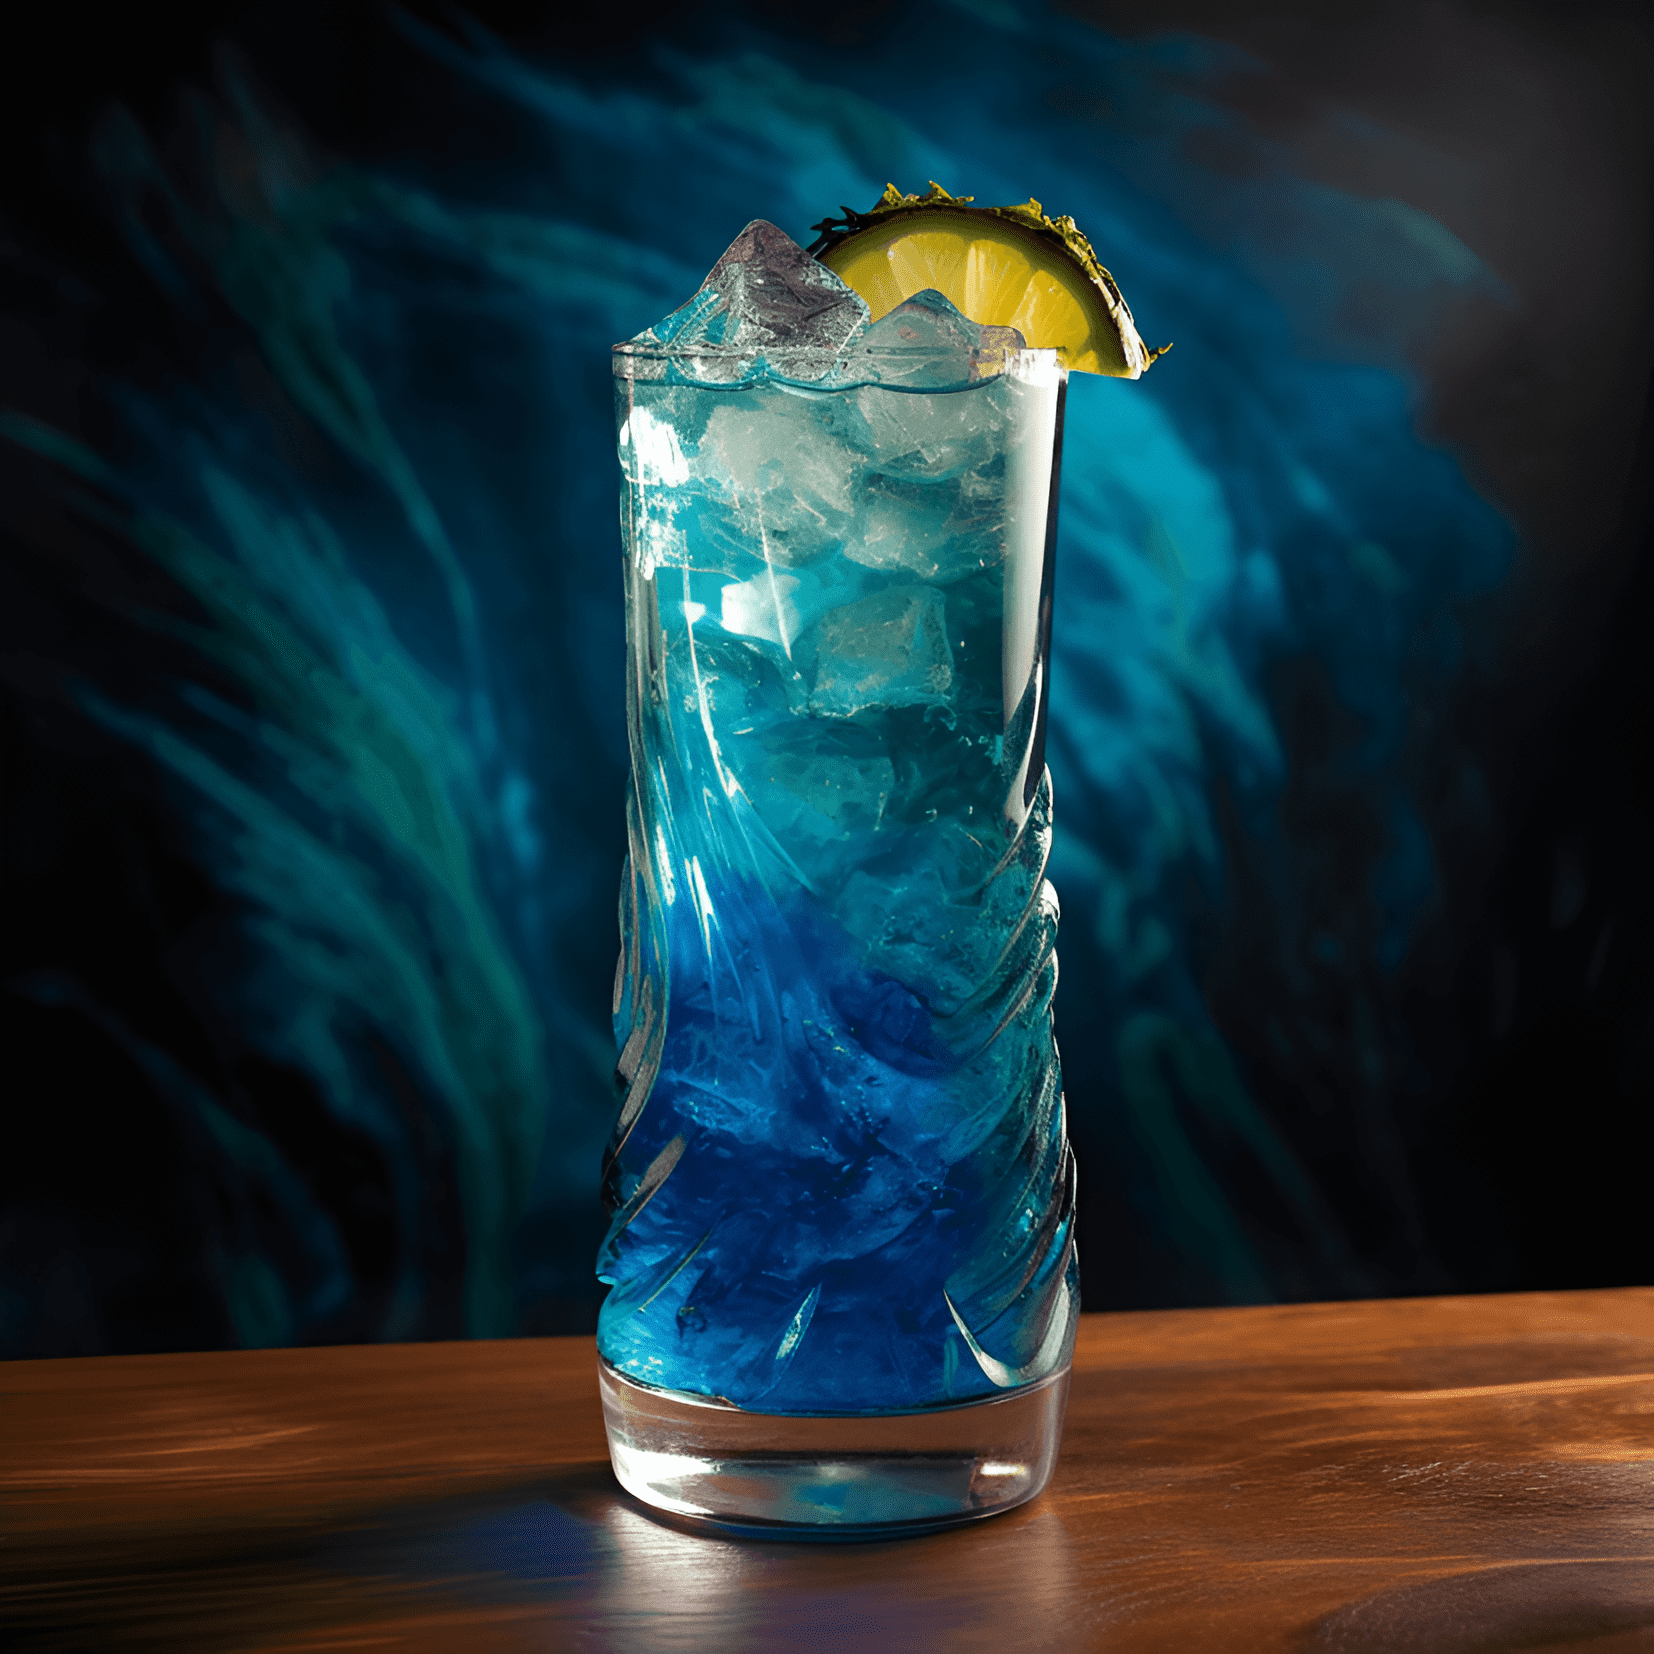 Tsunami Cocktail Recipe - The Tsunami cocktail offers a delightful combination of sweet, sour, and fruity flavors. The drink is well-balanced, with a strong citrus kick from the lemon and lime juices, complemented by the sweetness of the blue curaçao and pineapple juice. The vodka adds a subtle heat, while the coconut rum provides a smooth, tropical finish.